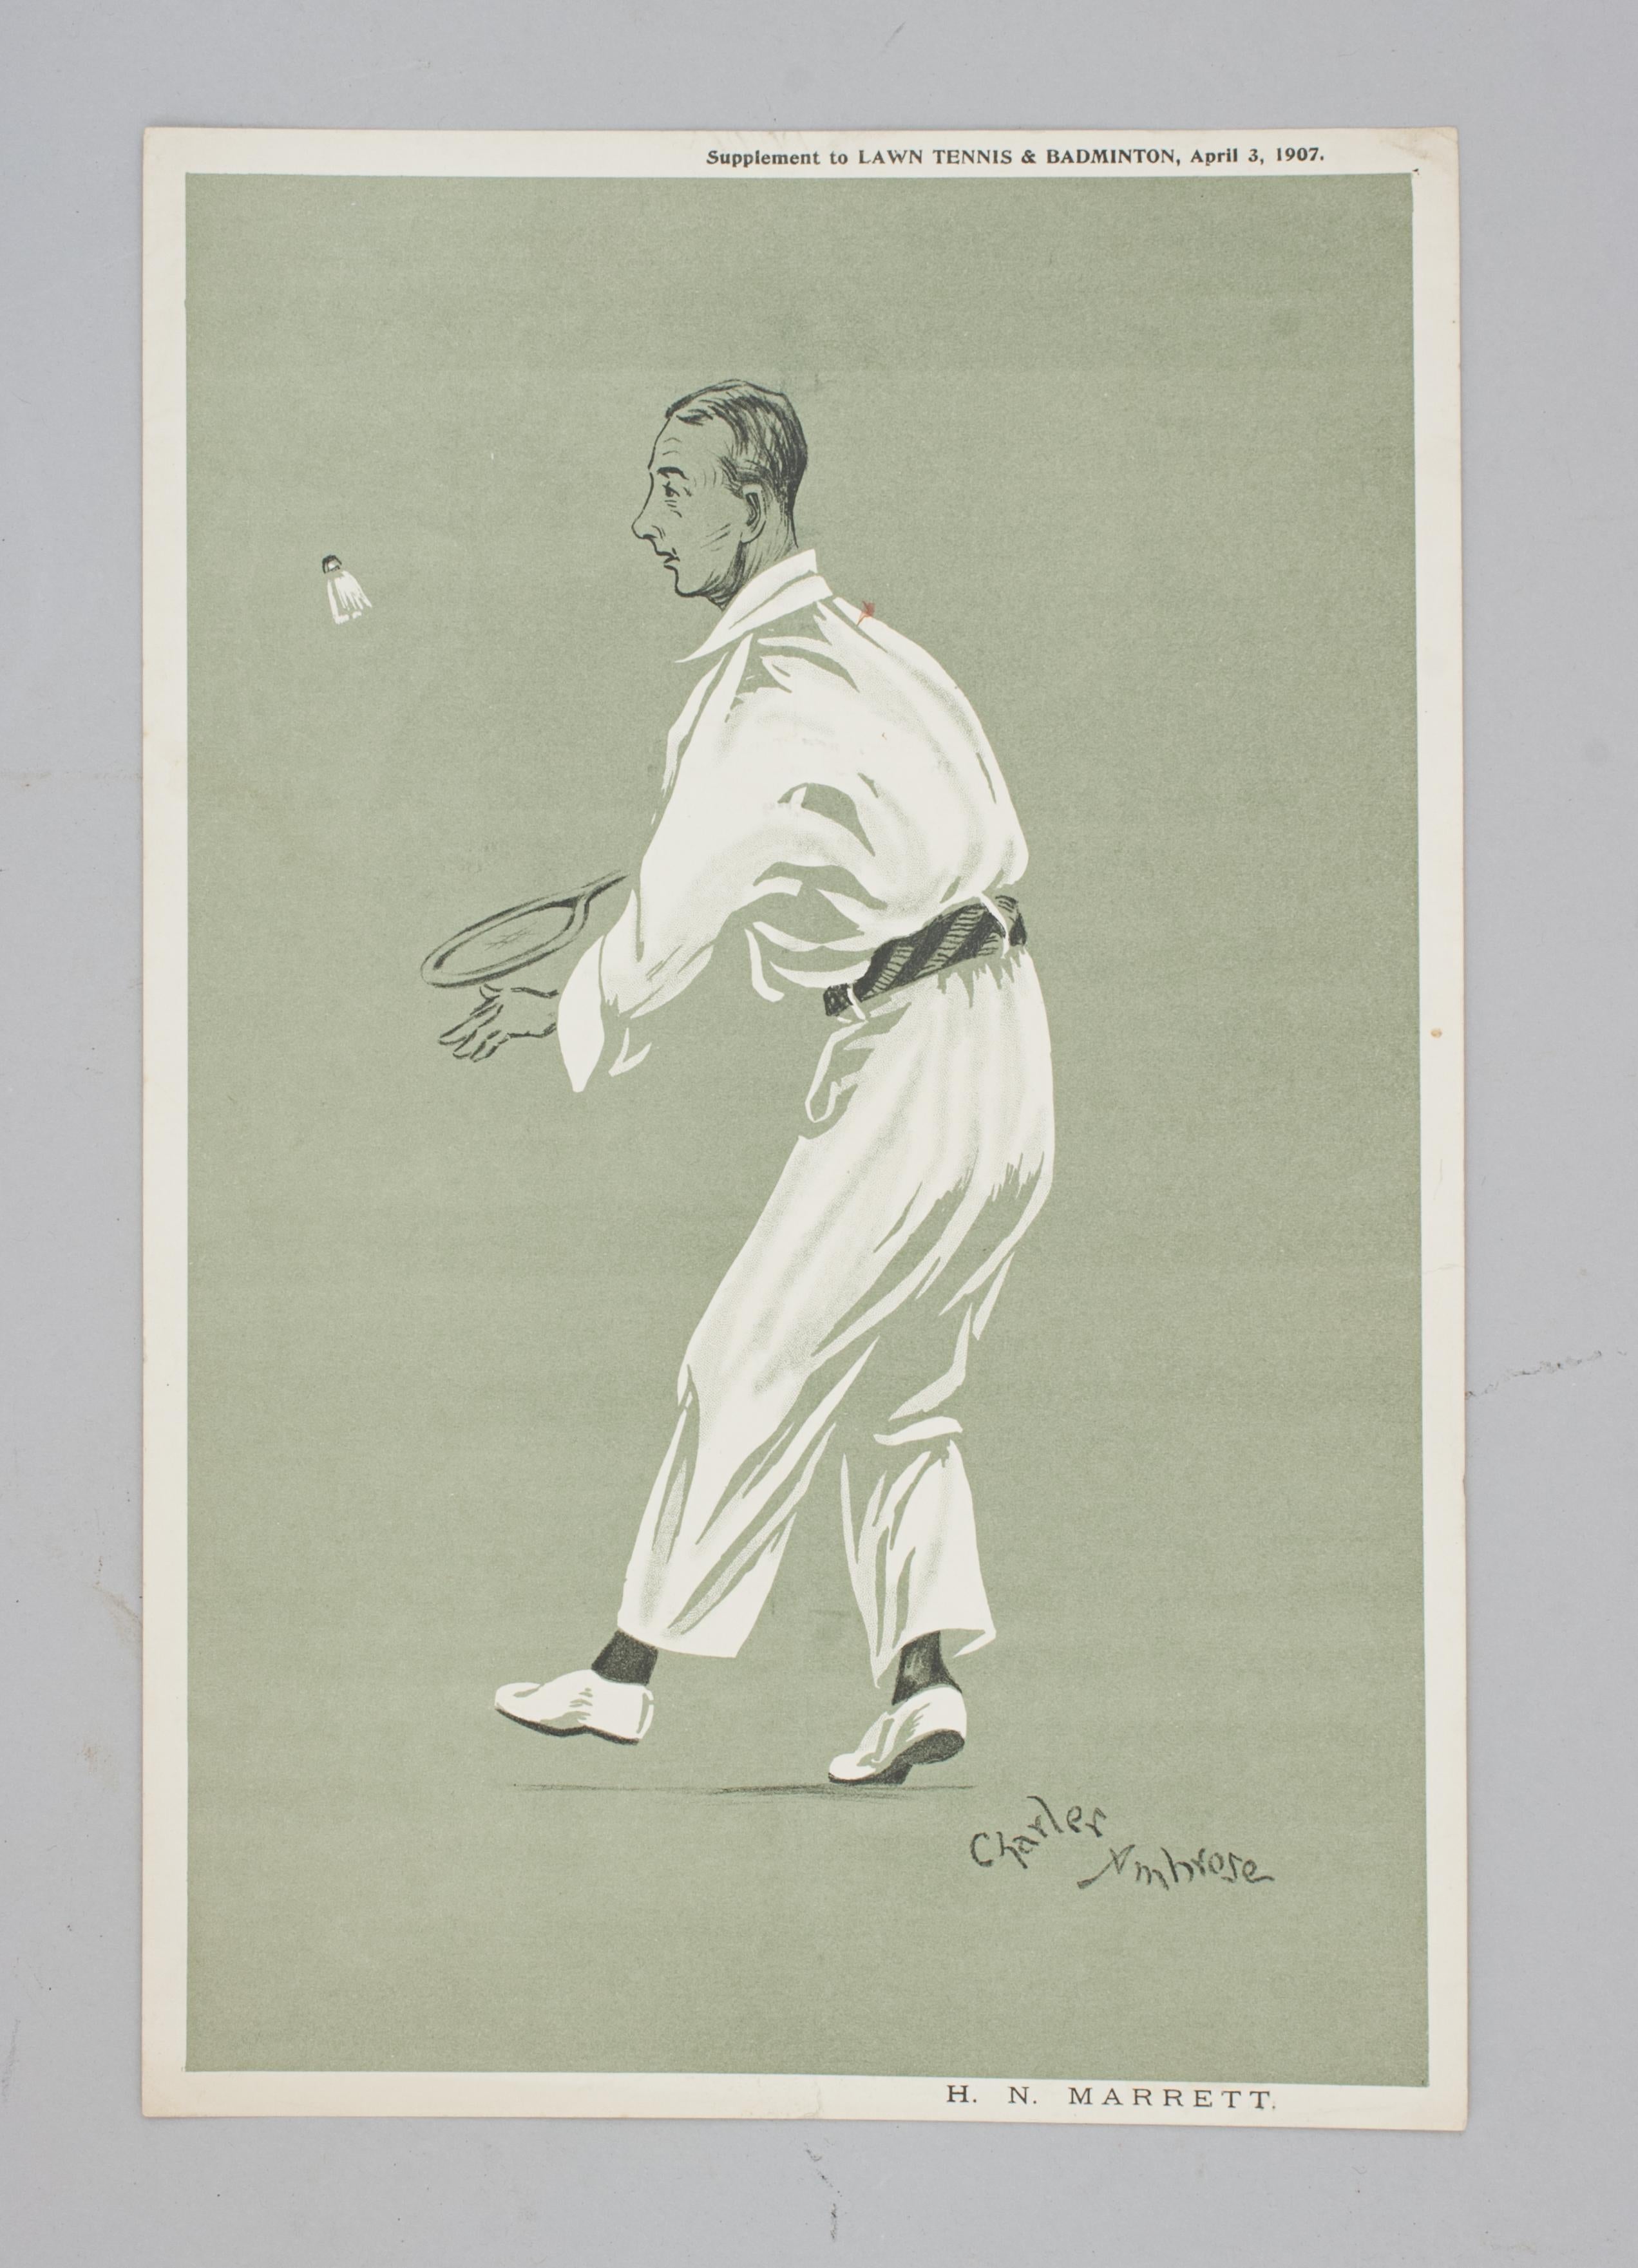 Badminton Player, H.N. Marrett, by Charles Ambrose.
A vintage badminton print of a caricature of H.N. Marrett by Charles Ambrose. Marrett was born in Umballa, India, and died there but he spent much of his life living in England. Henry Norman